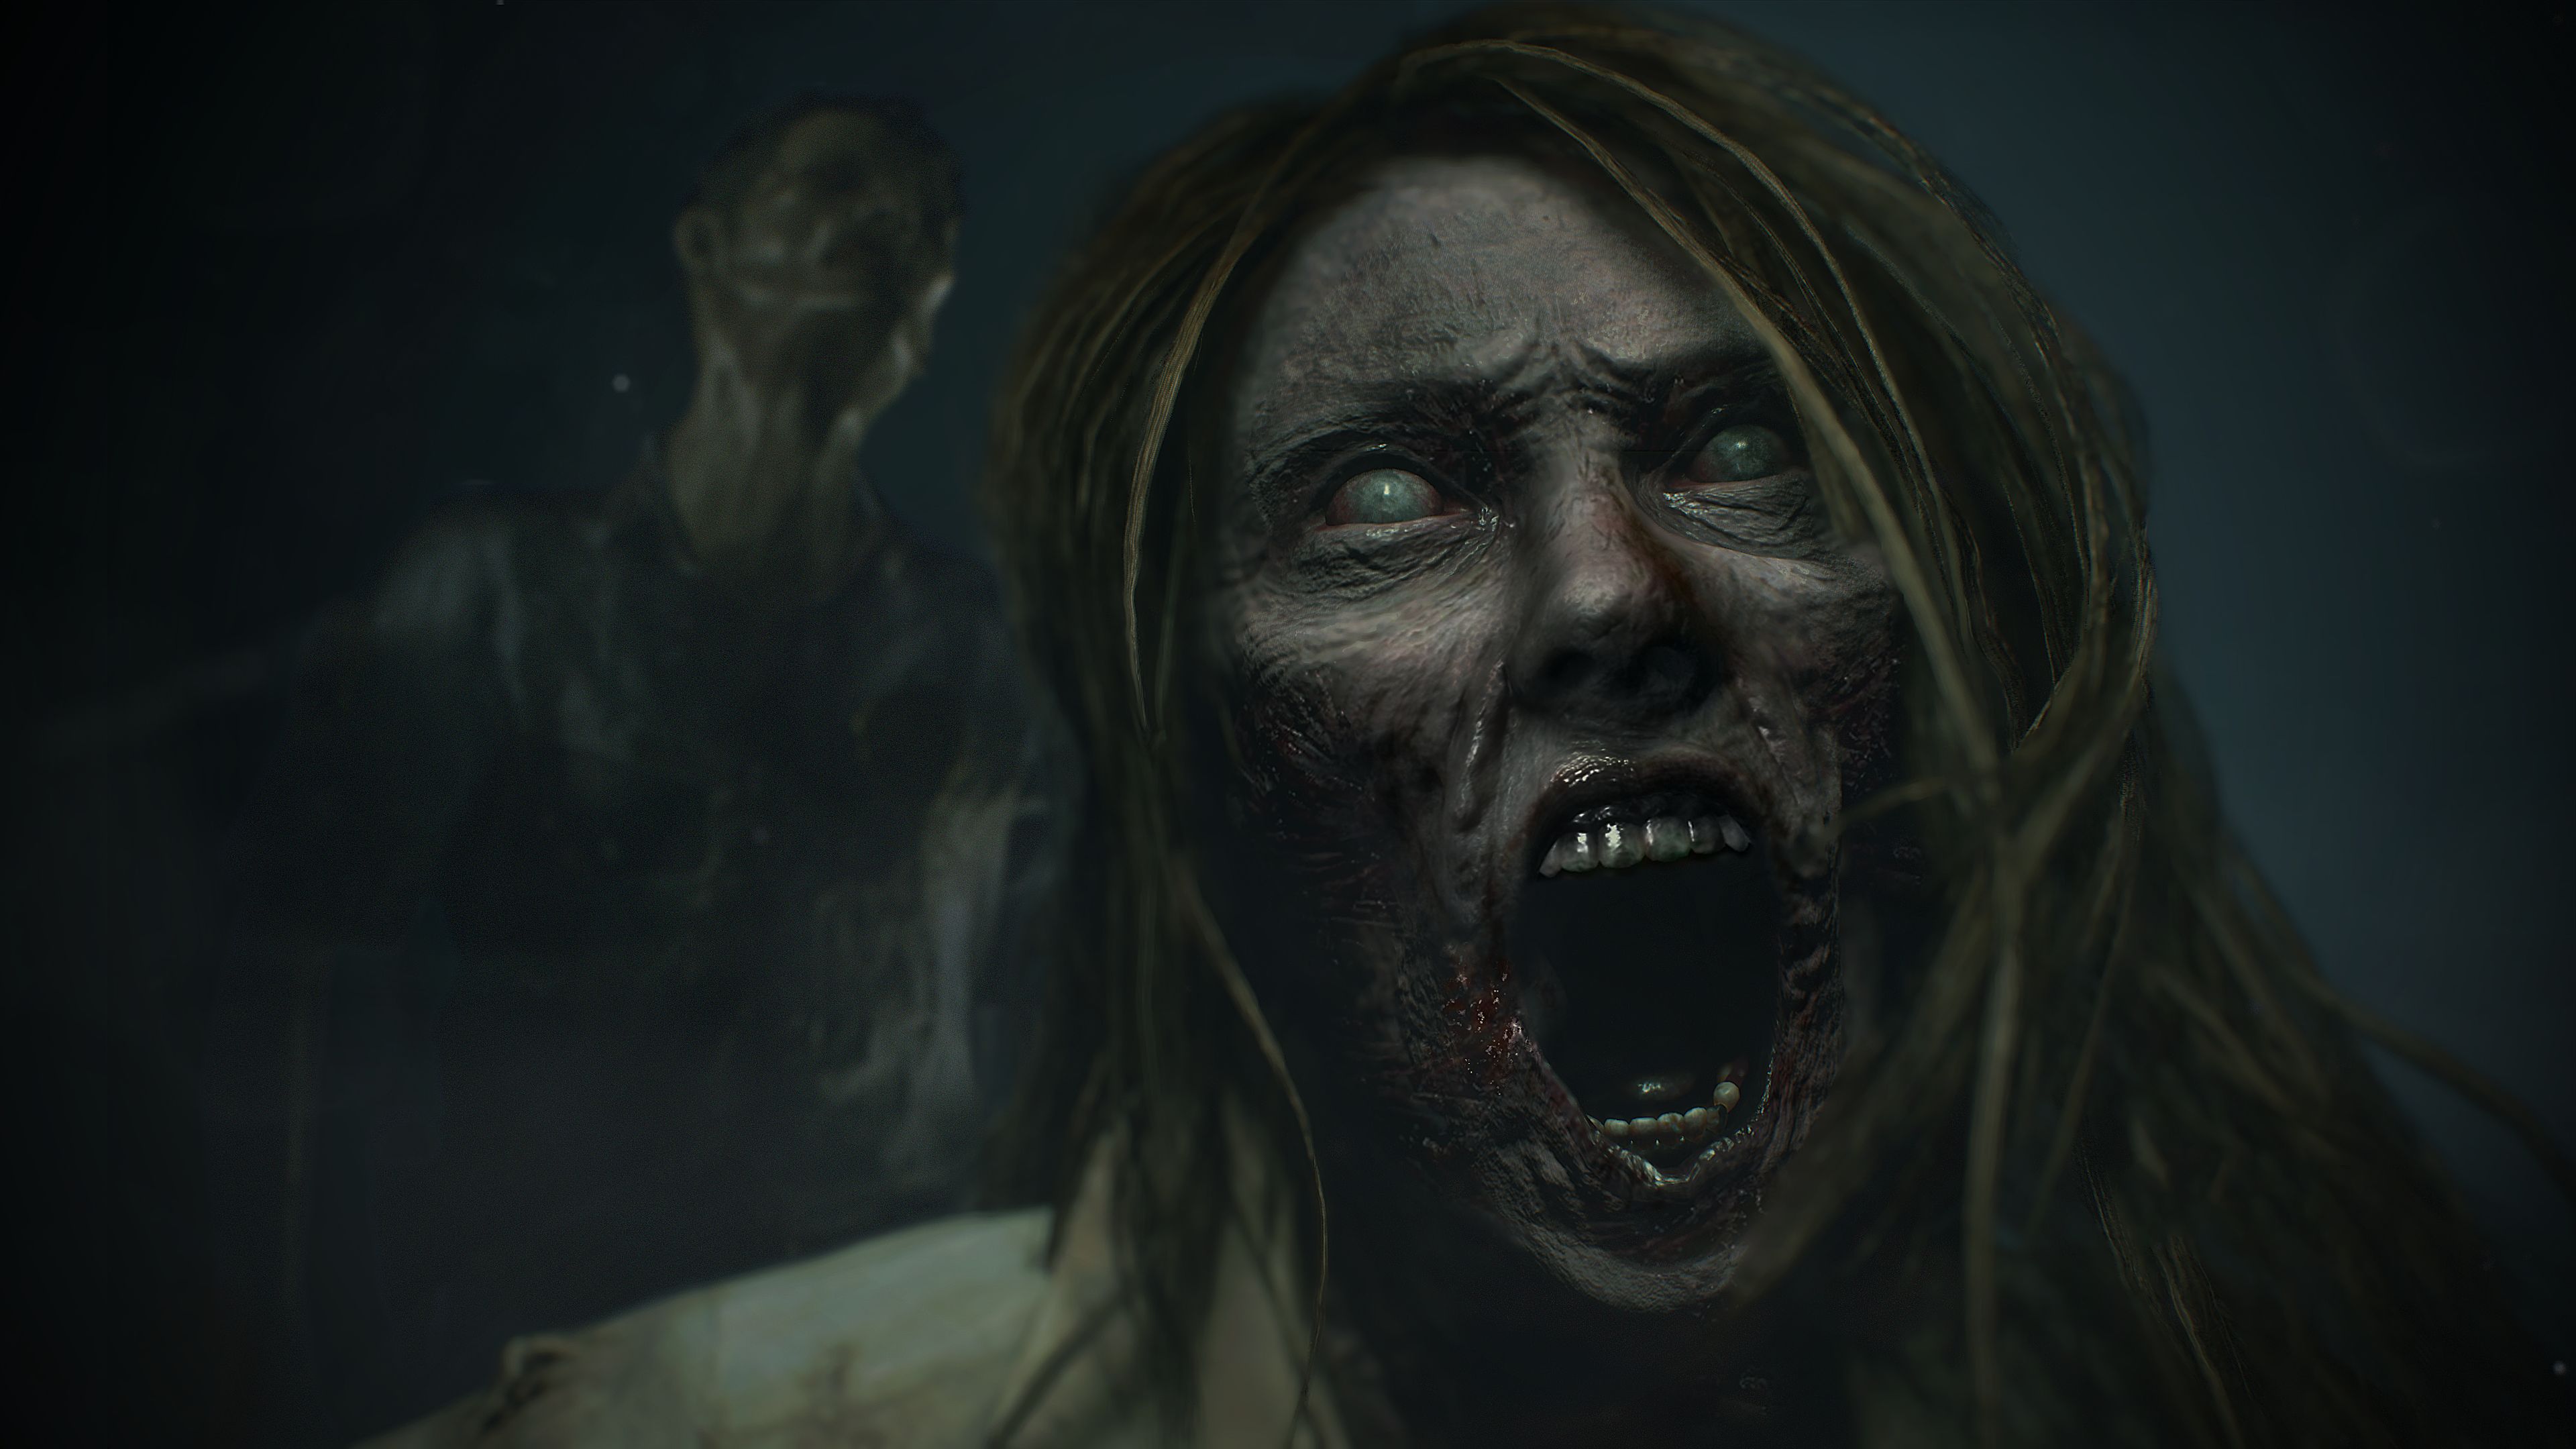 A zombified woman's face up close, screaming